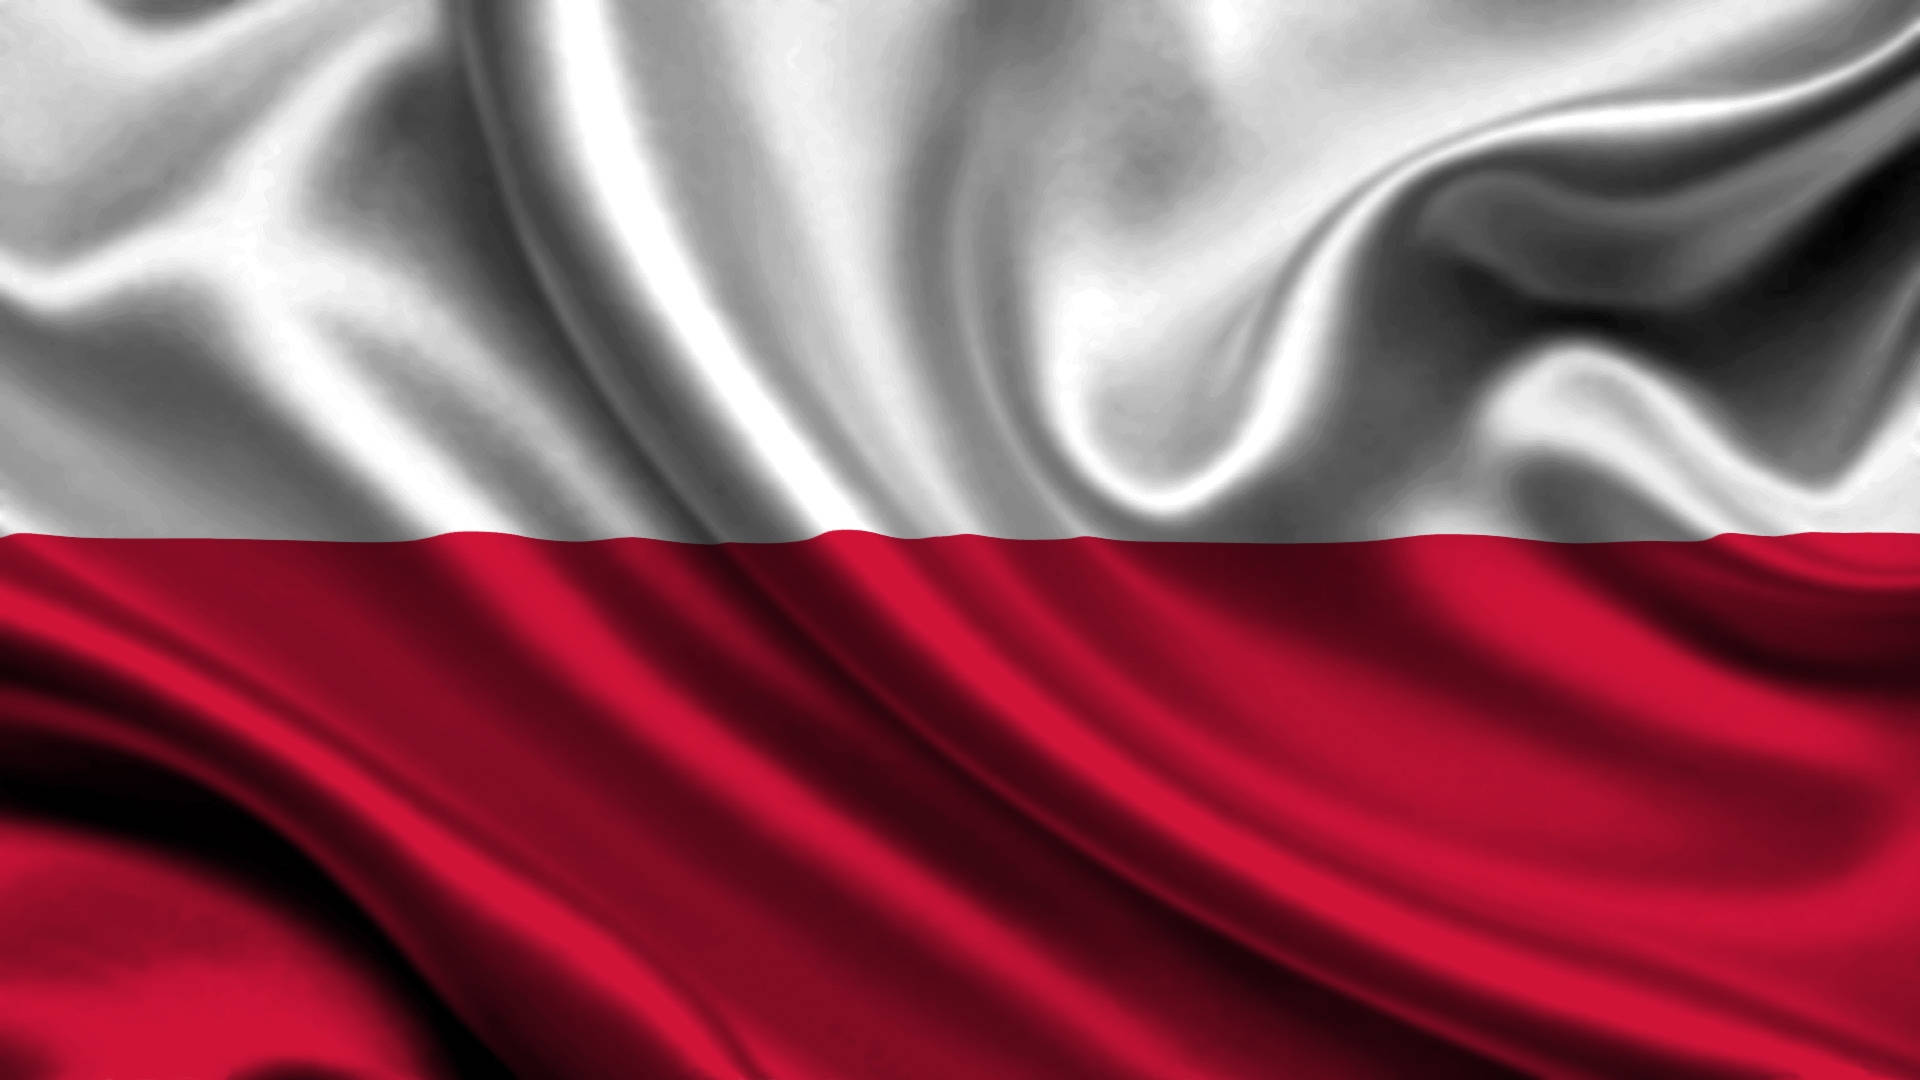 The Glorious Flag of Poland Unfurled Wallpaper